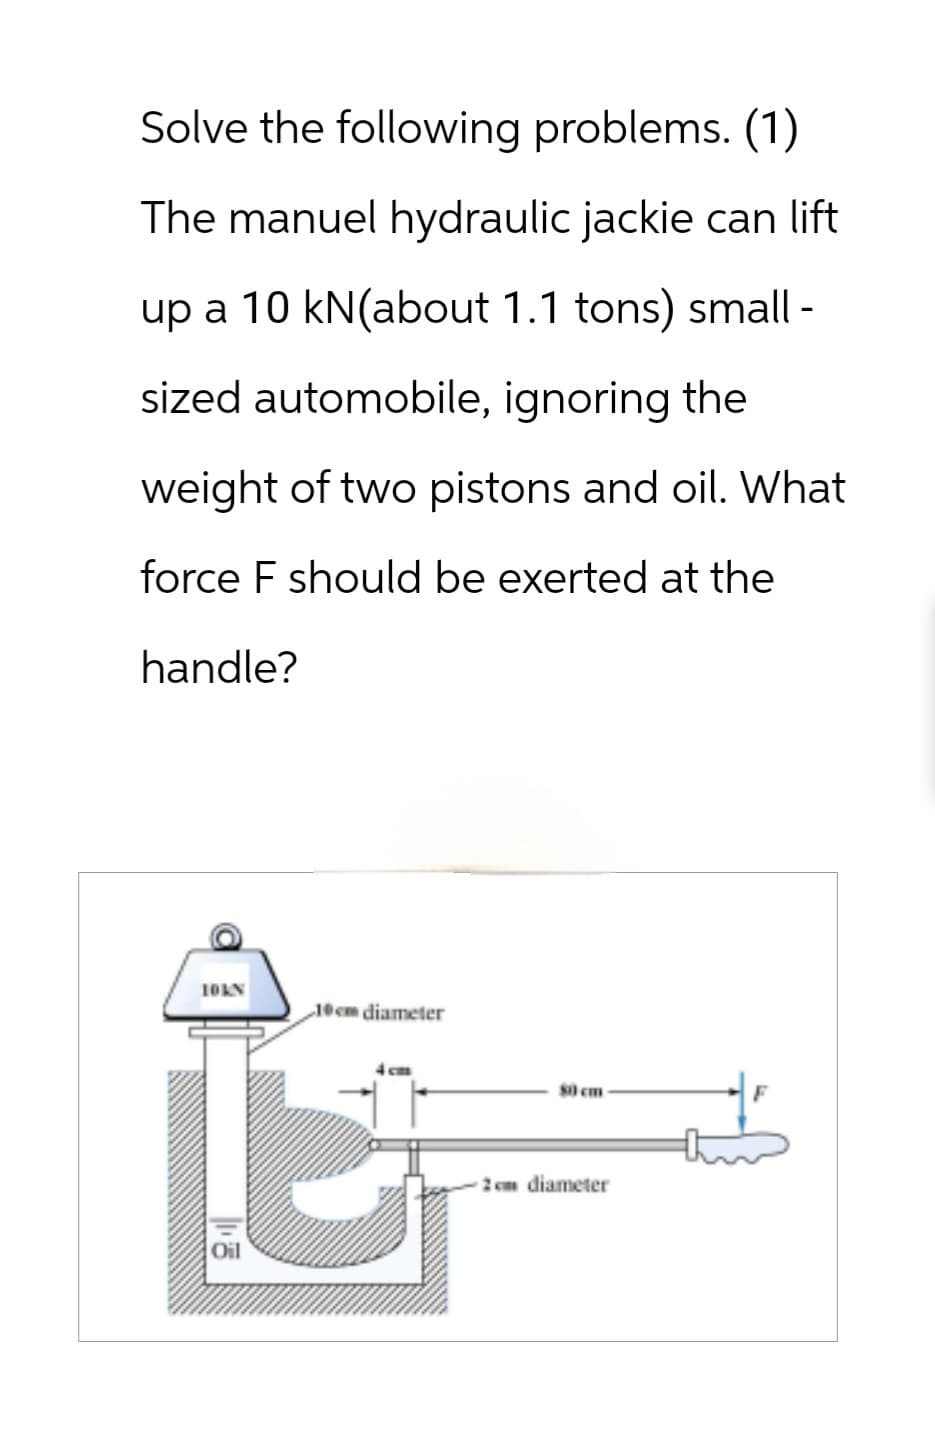 Solve the following problems. (1)
The manuel hydraulic jackie can lift
up a 10 kN(about 1.1 tons) small -
sized automobile, ignoring the
weight of two pistons and oil. What
force F should be exerted at the
handle?
10KN
10cm diameter
4 cm
80 cm
2cm diameter